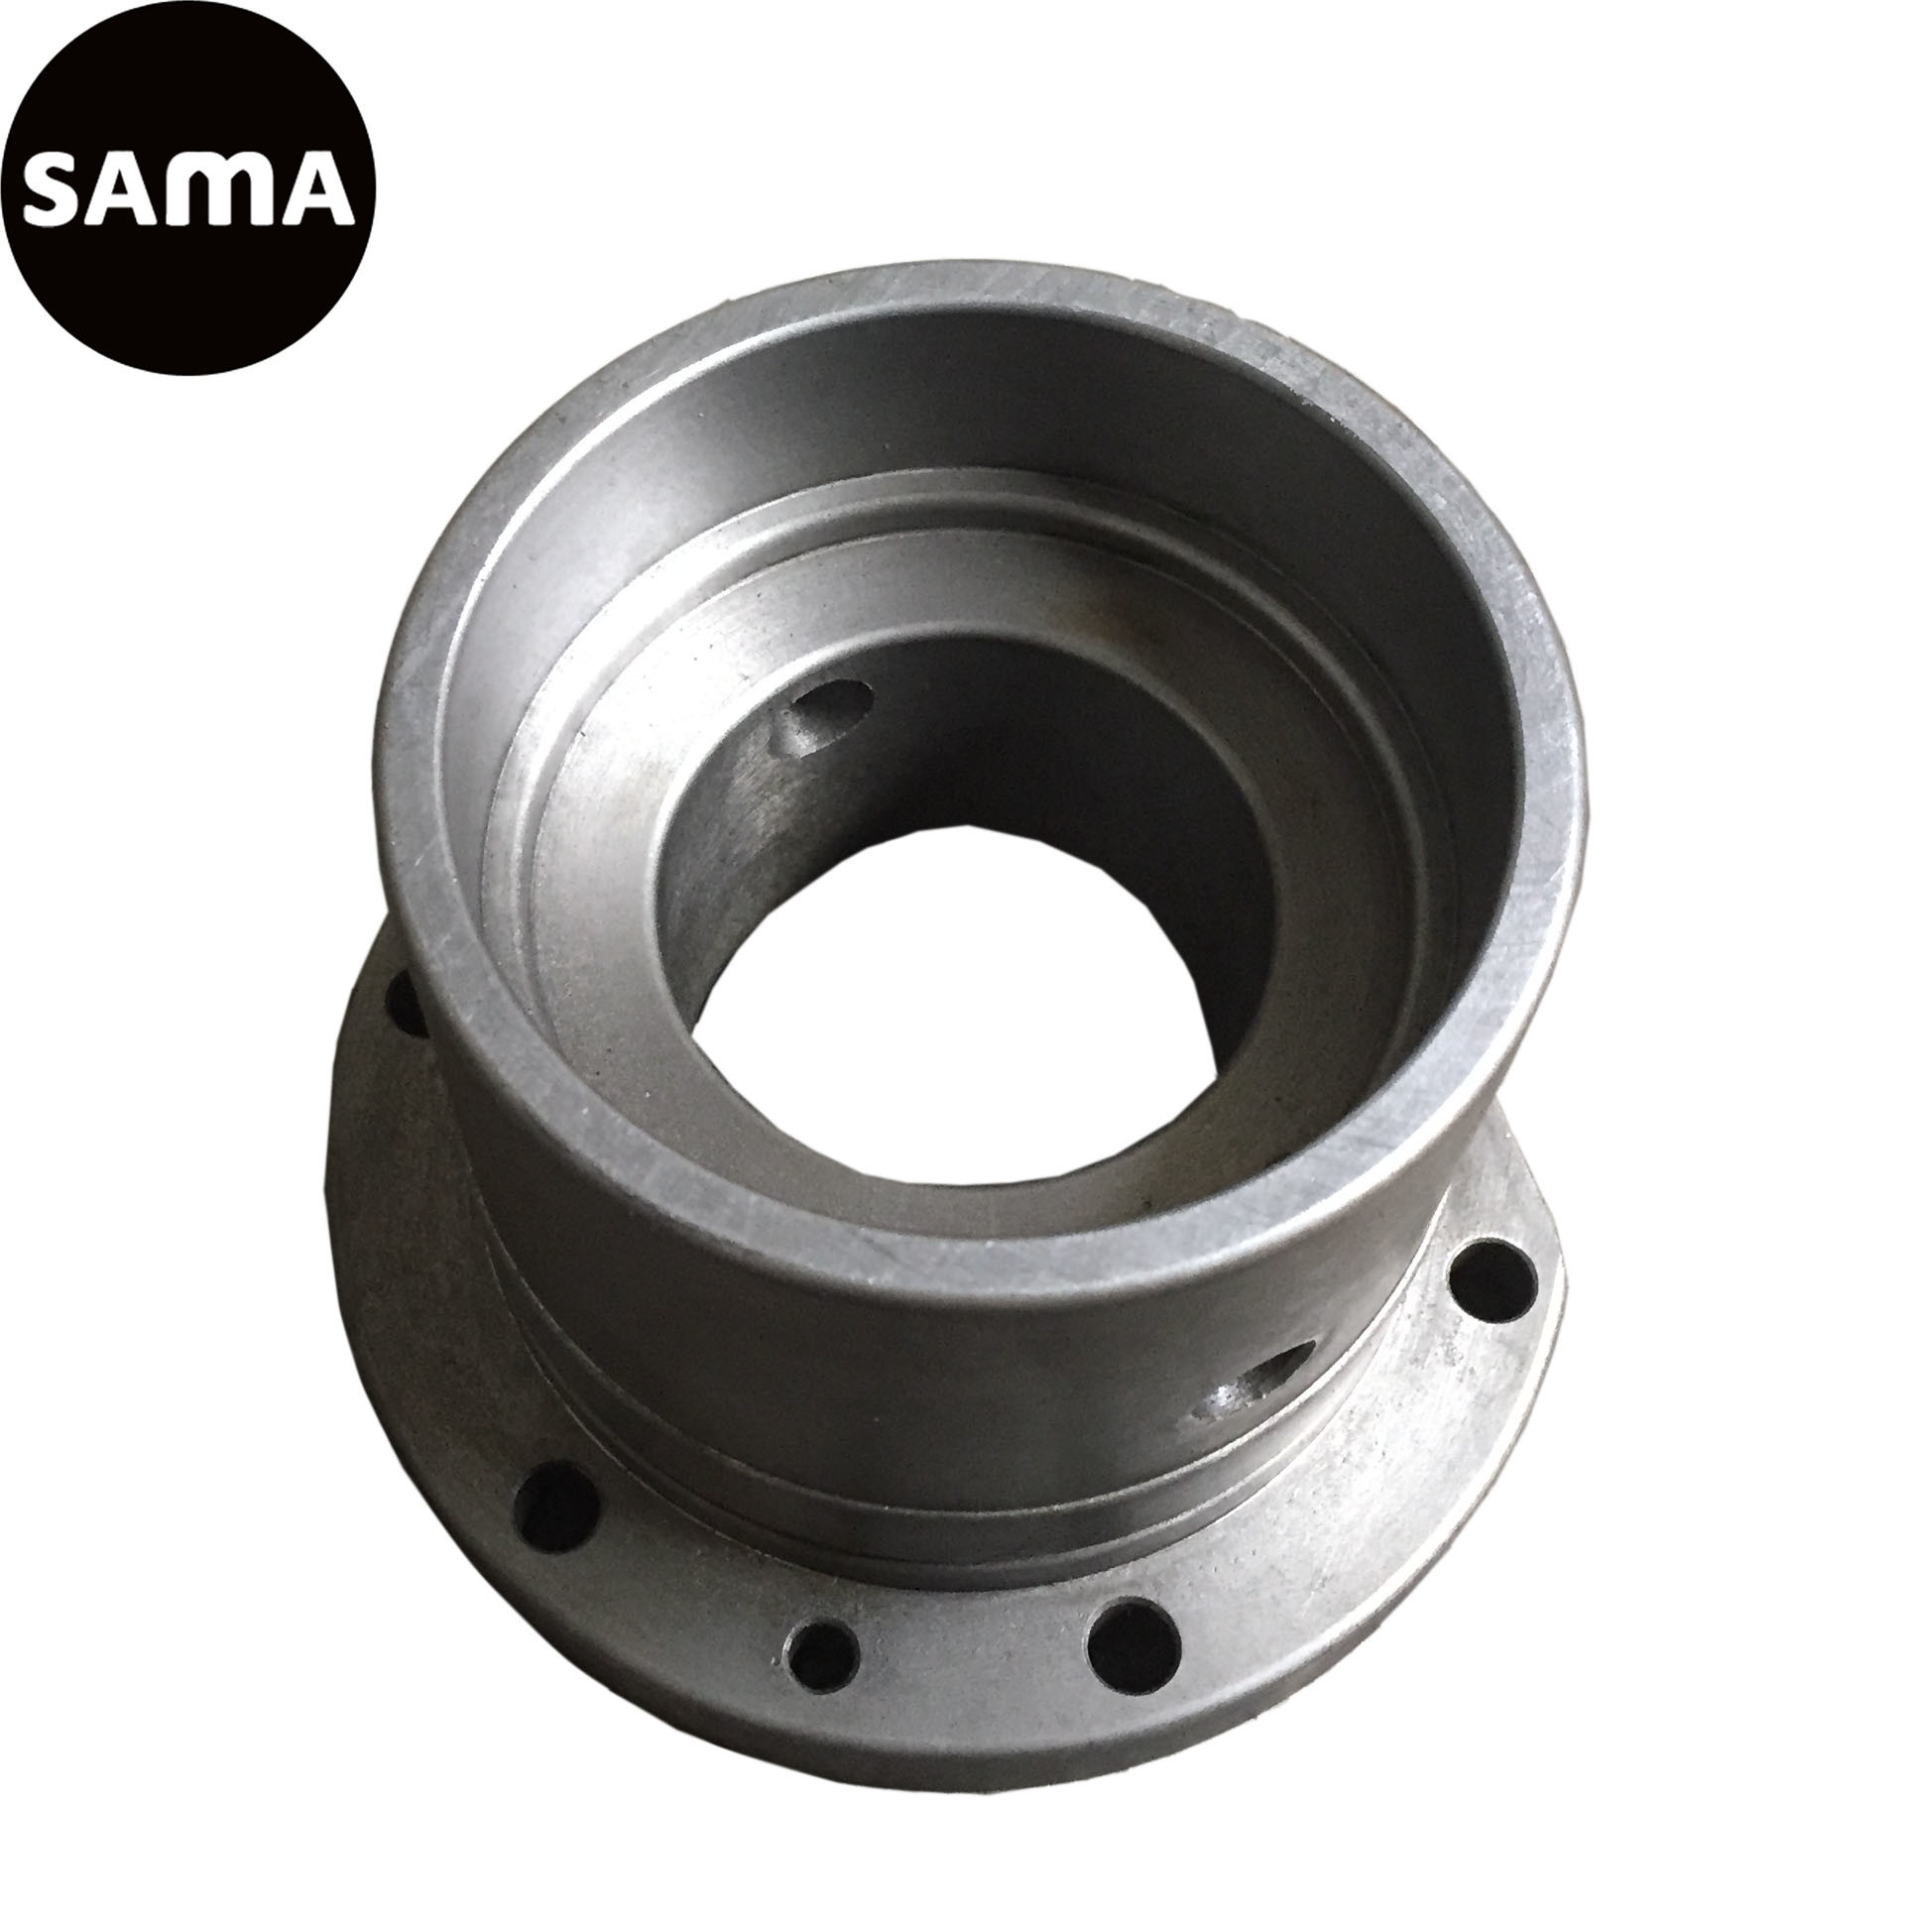 Customized Iron Flange Casting with Precision Machining